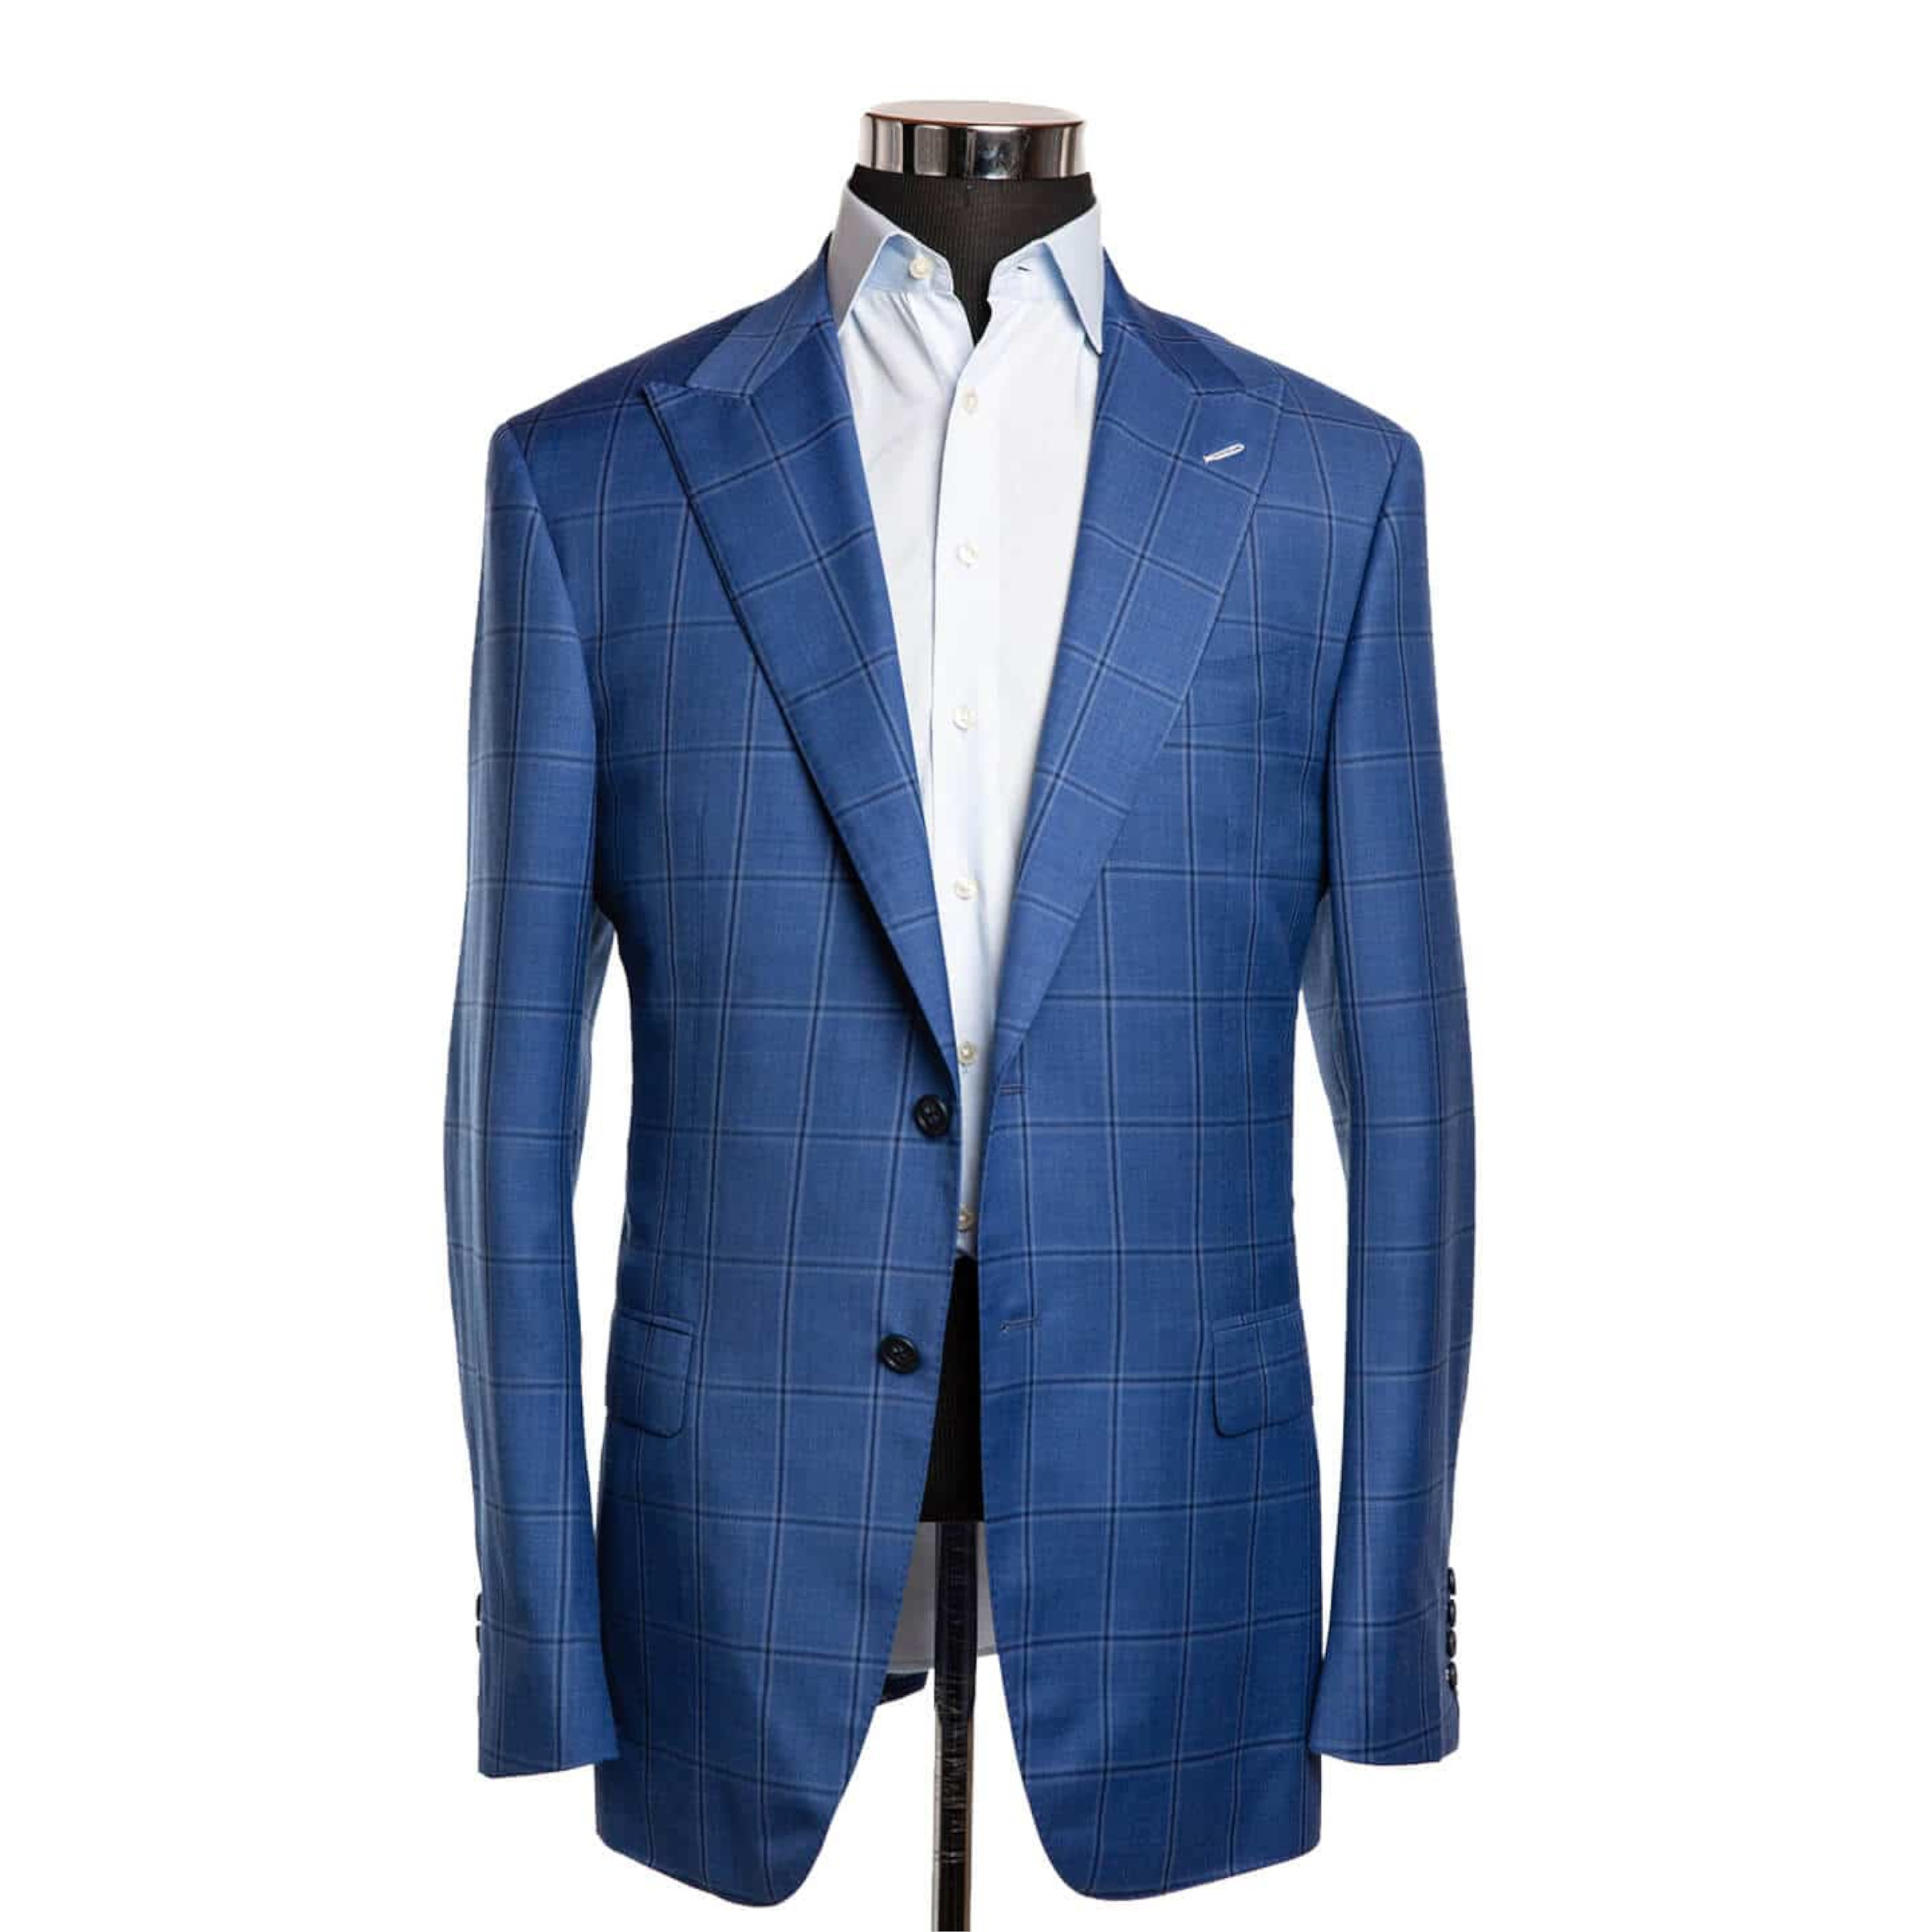 A light blue sport coat with a windowpane pattern on a body form with a very light blue shirt on a white background